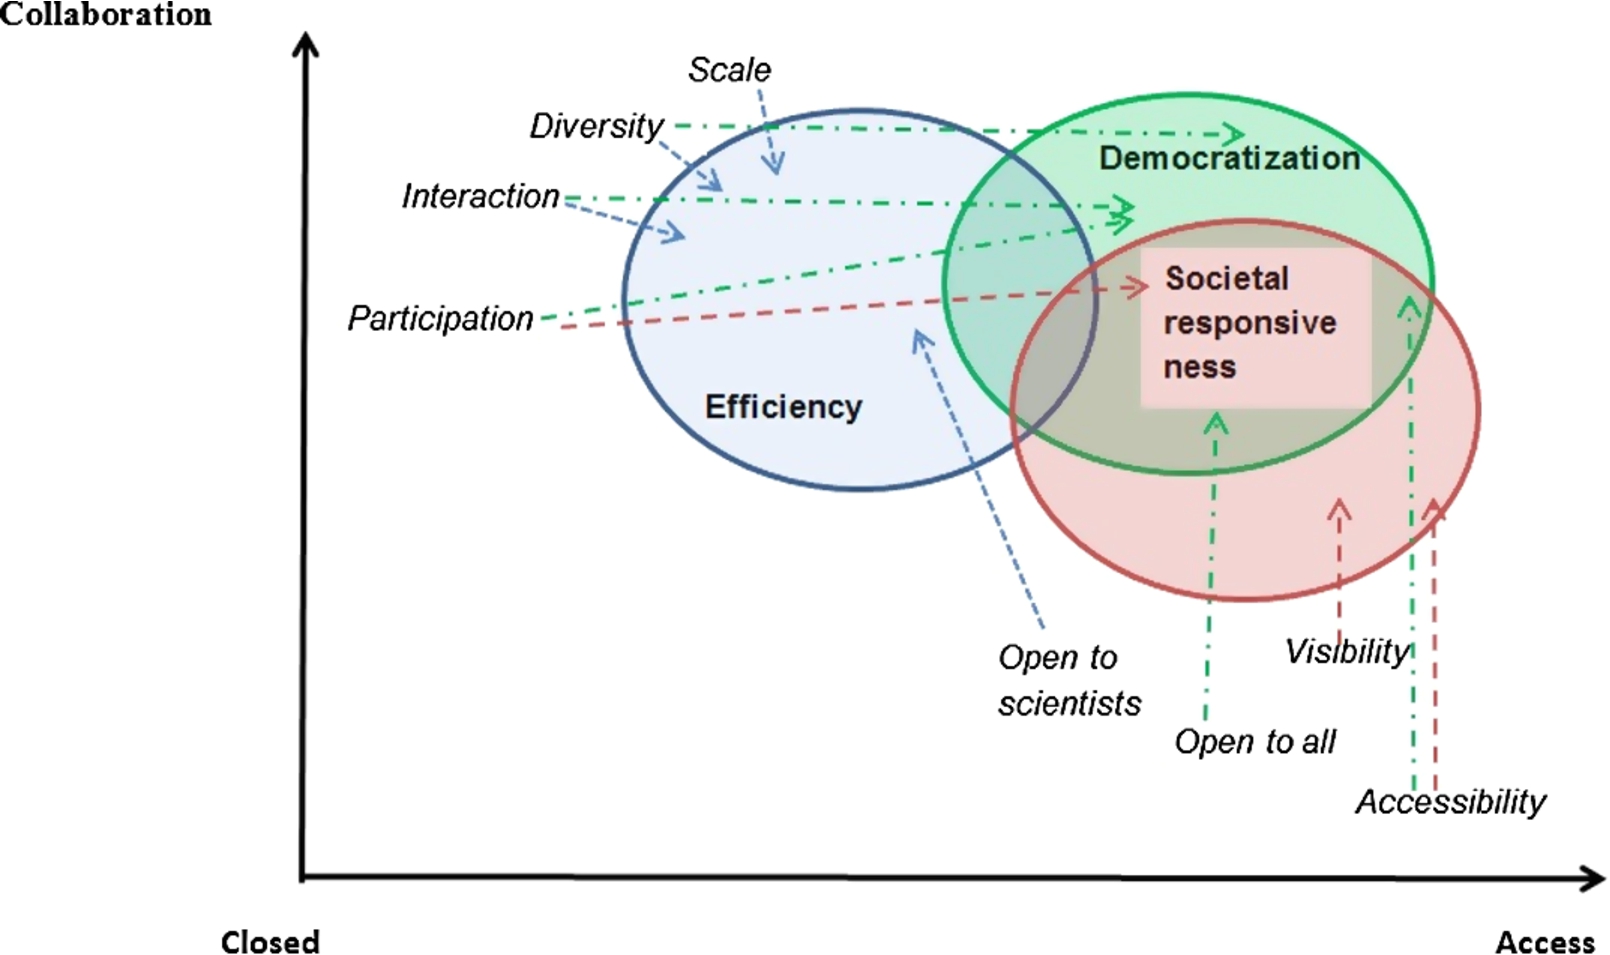 Two dimensions of open science.